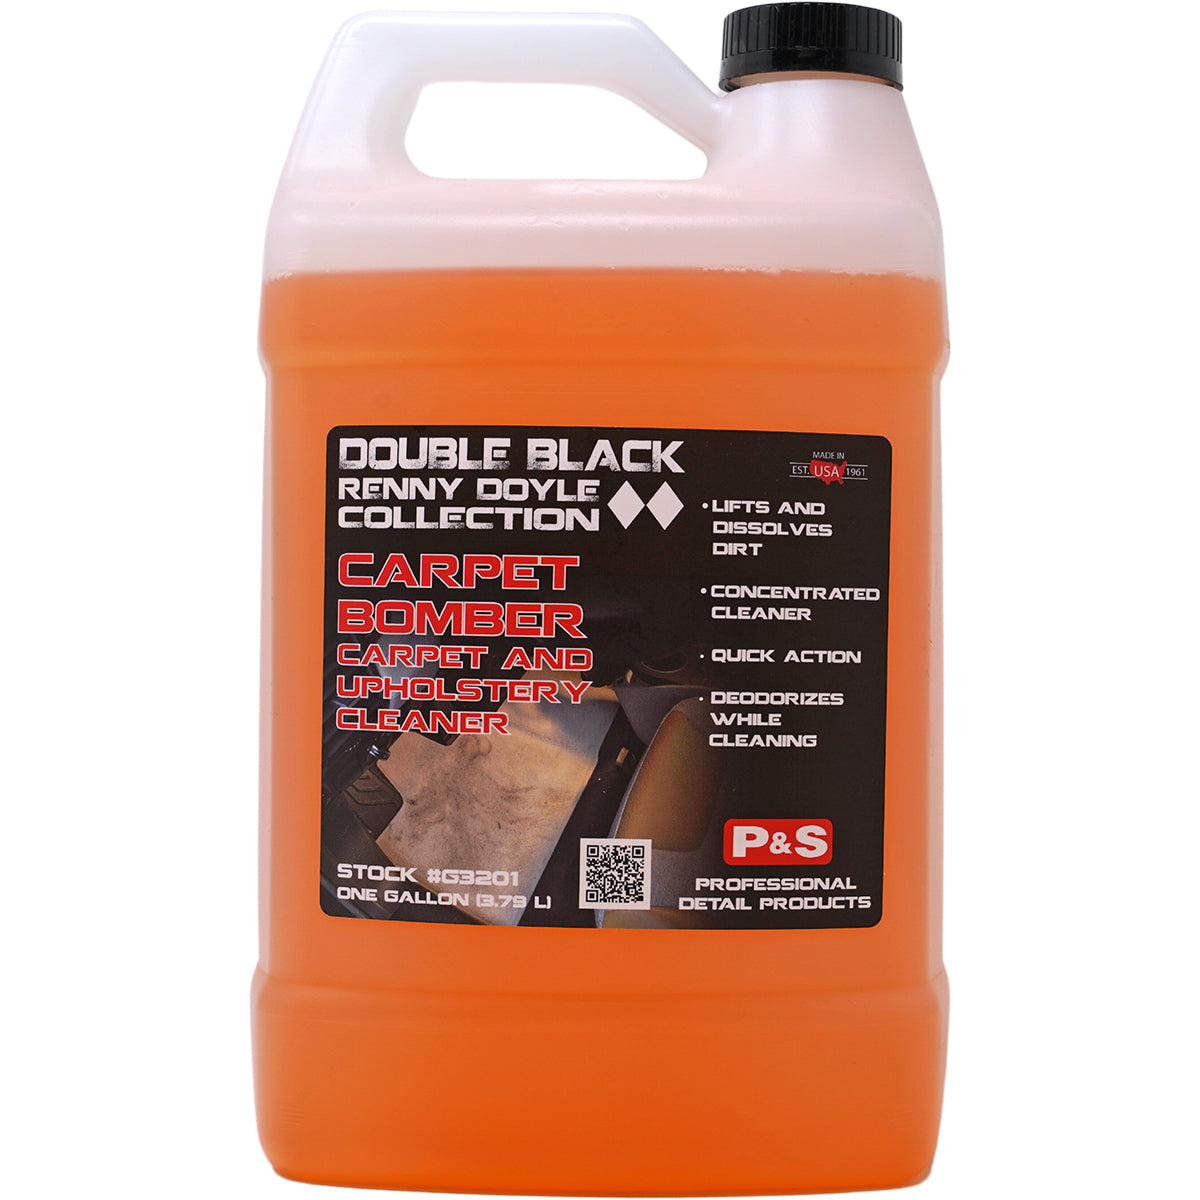 P&S Professional Detail Products - Carpet Bomber - Carpet and